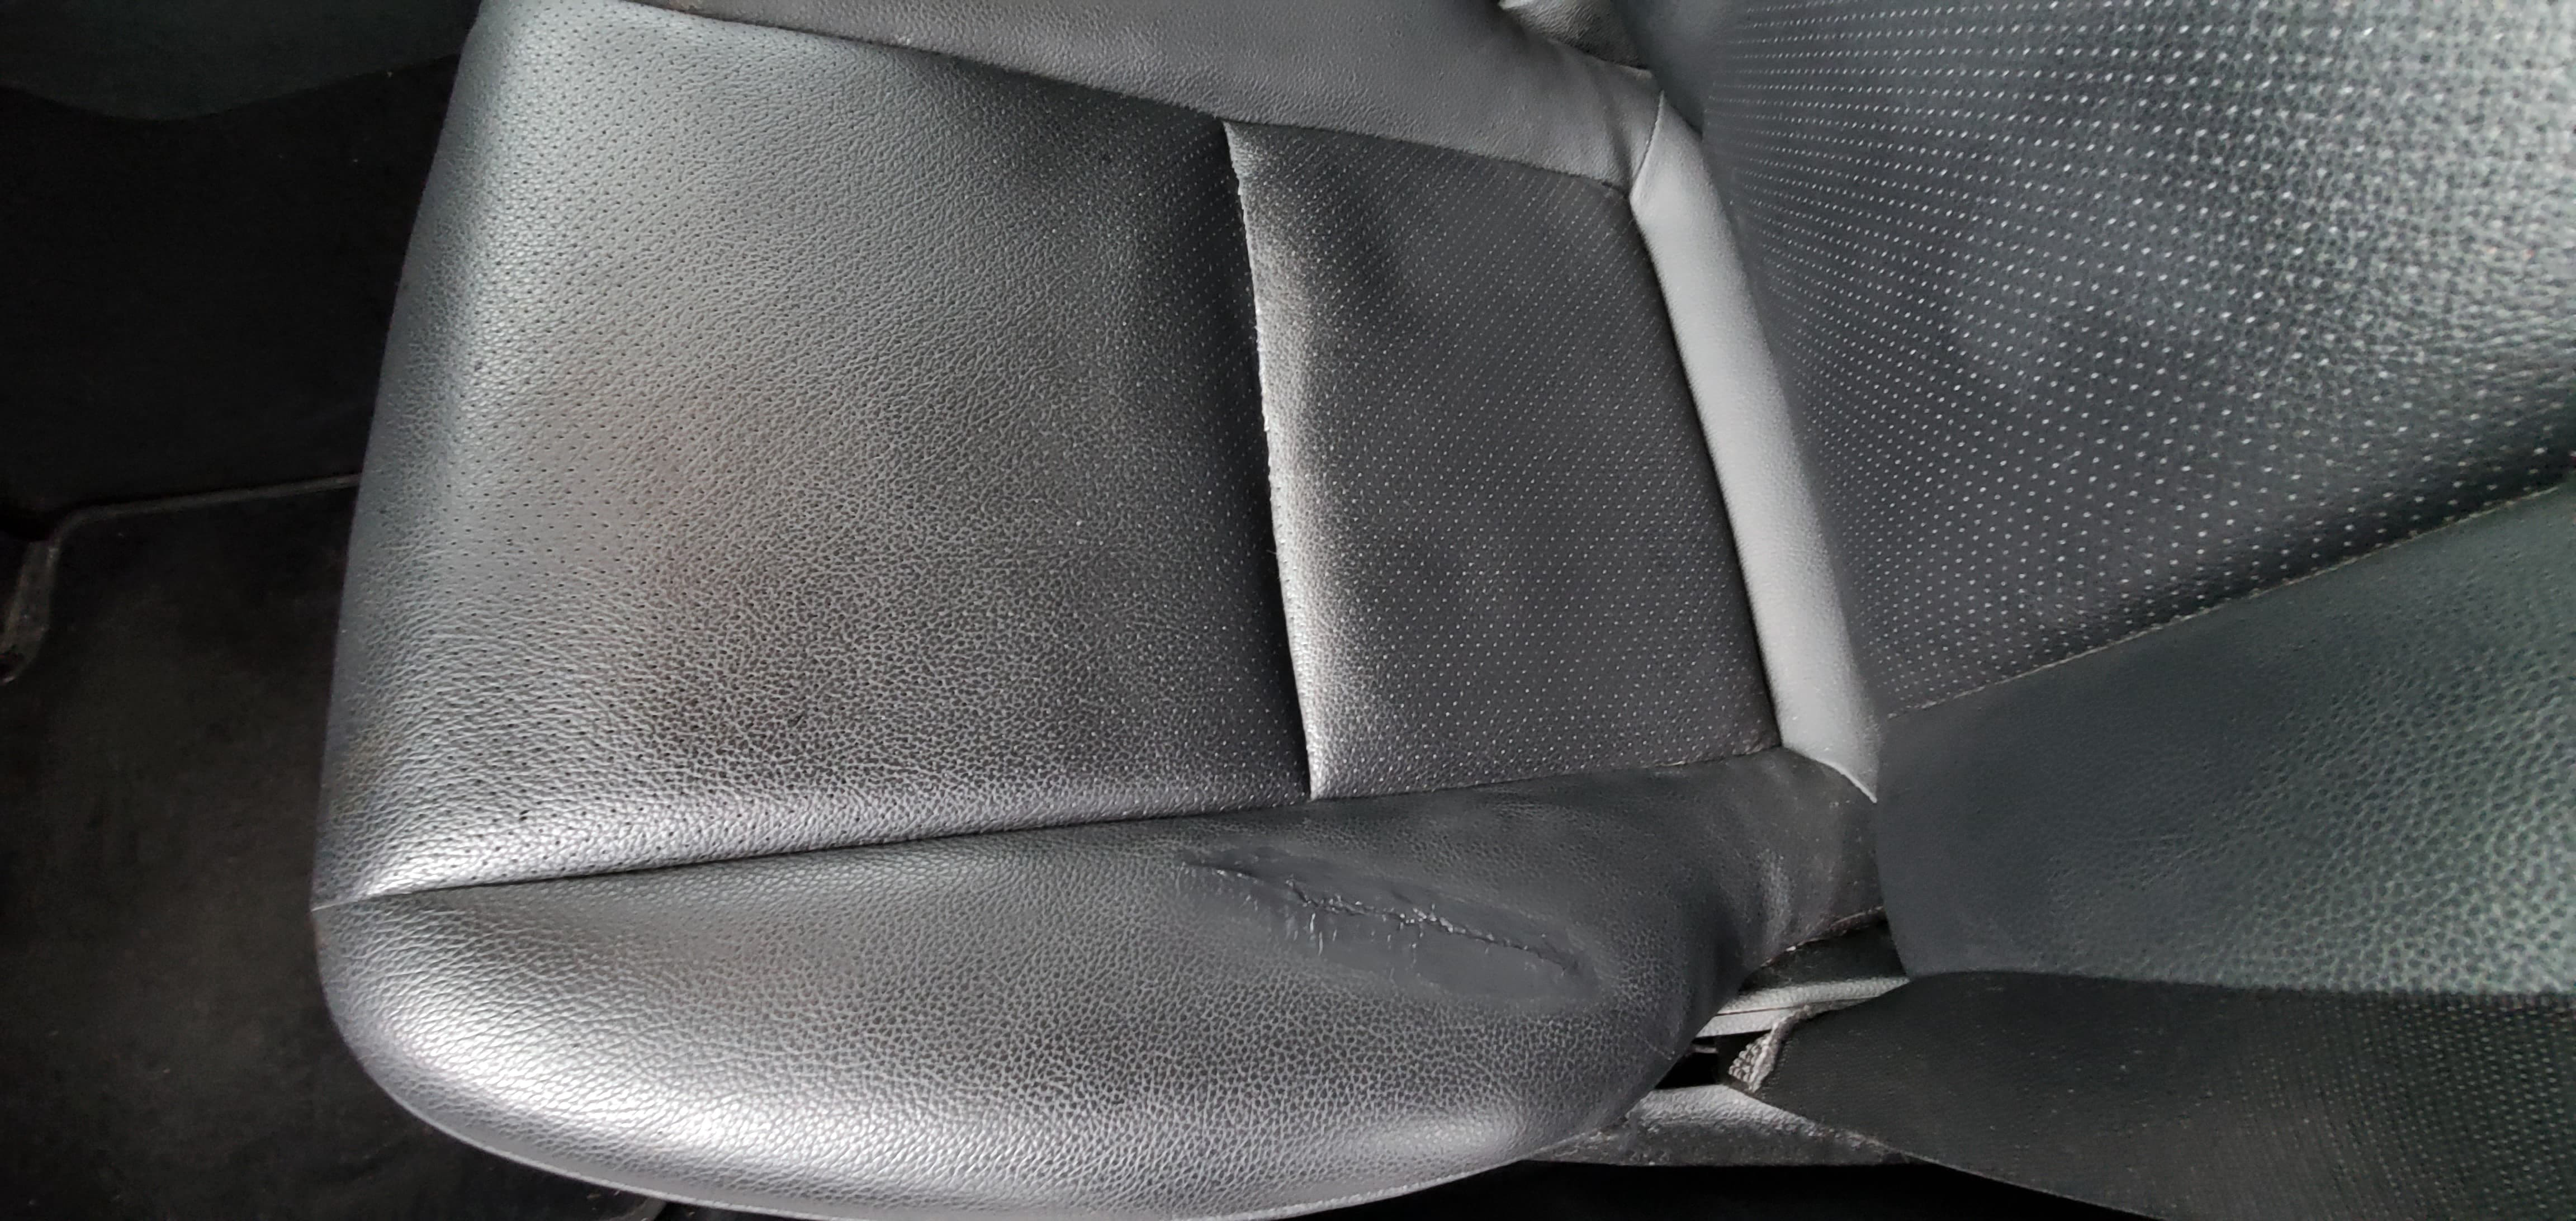 The Torn Seat Has Been Repaired With Tear Mender And Disguised By Color Compound